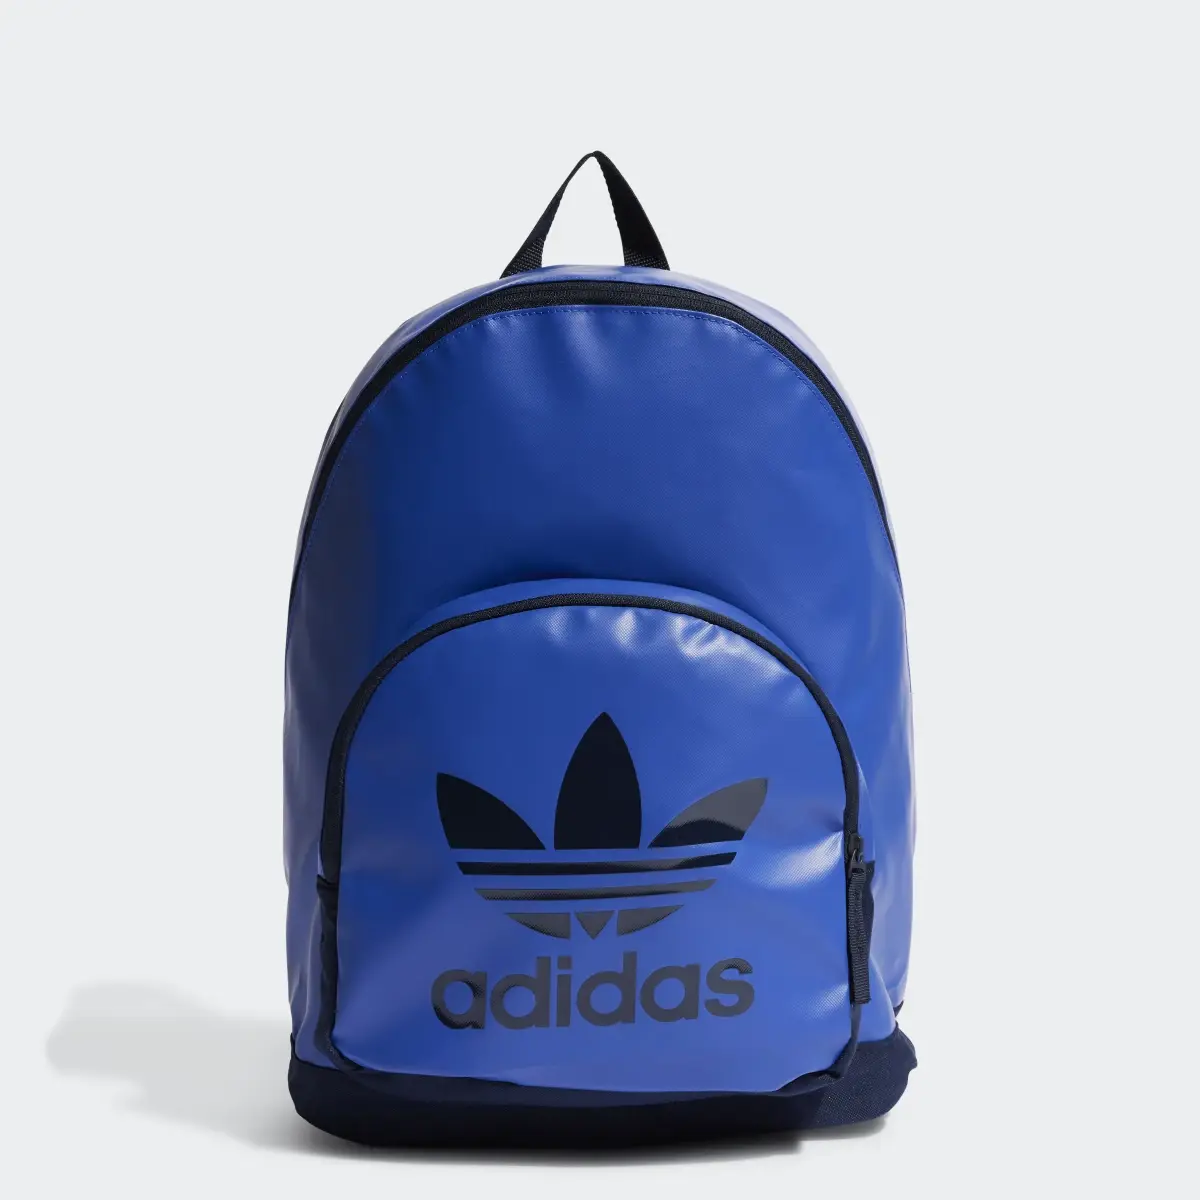 Adidas Adicolor Archive Backpack. 1